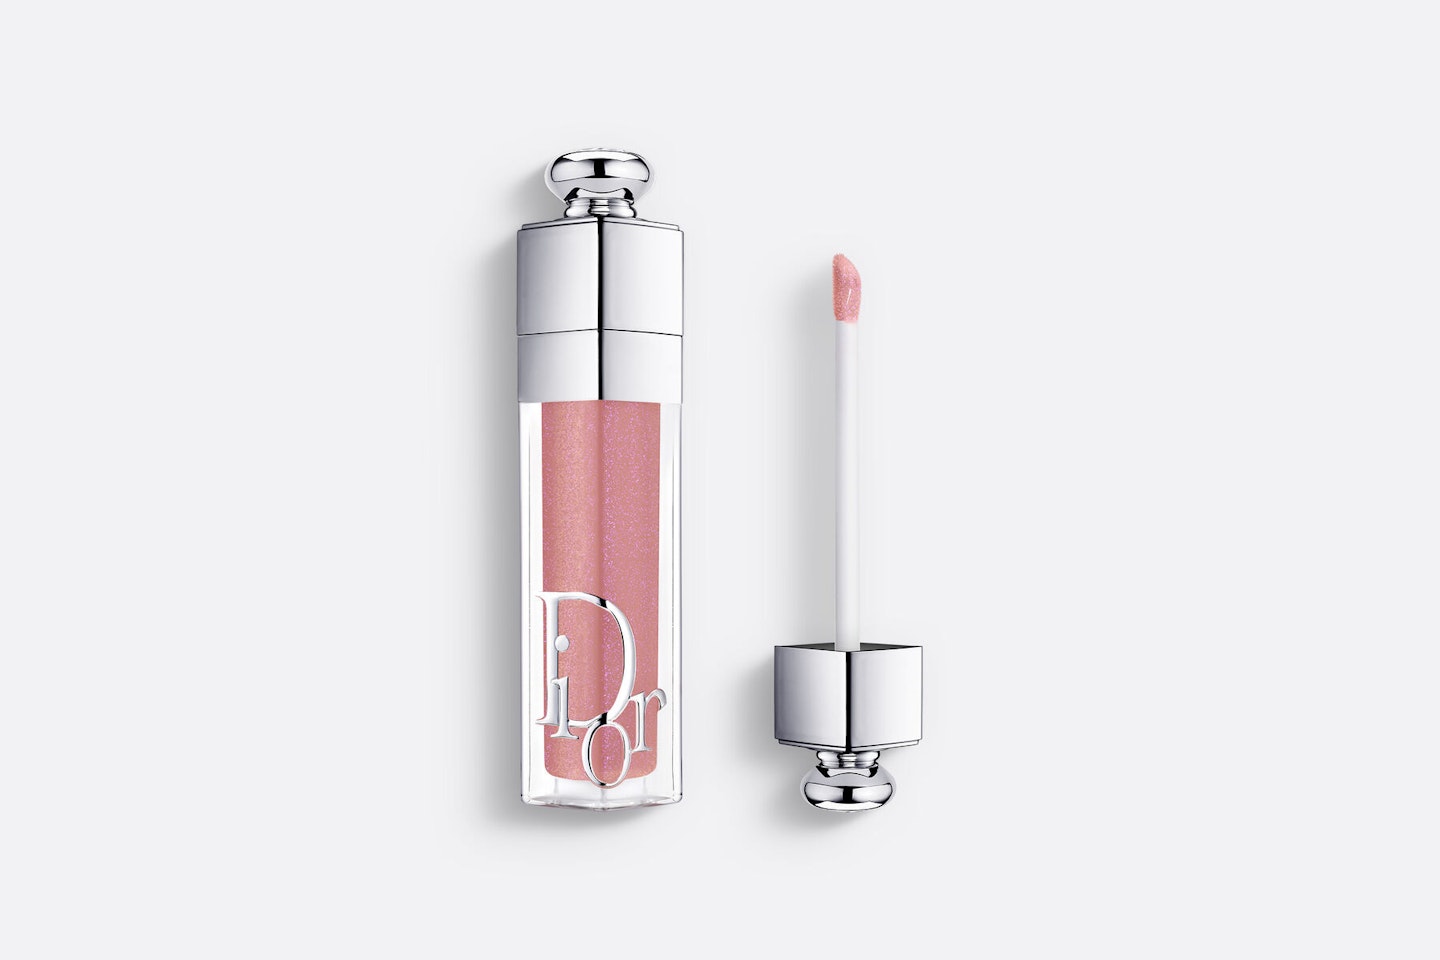 Dior Addict Lip Maximizer in 056 Frosted Pink, £32